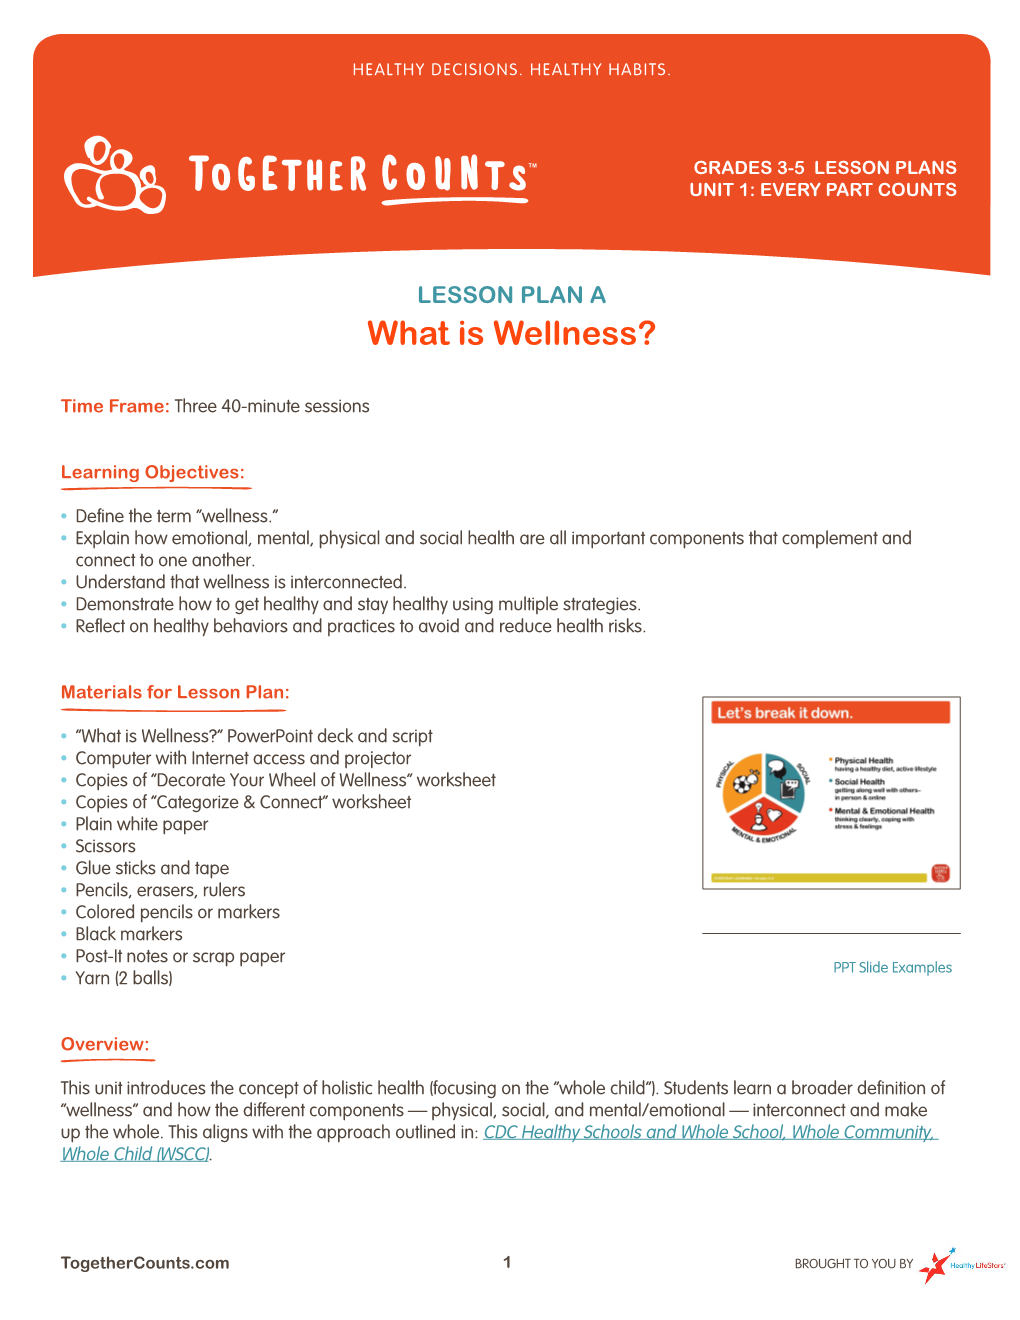 What Is Wellness?